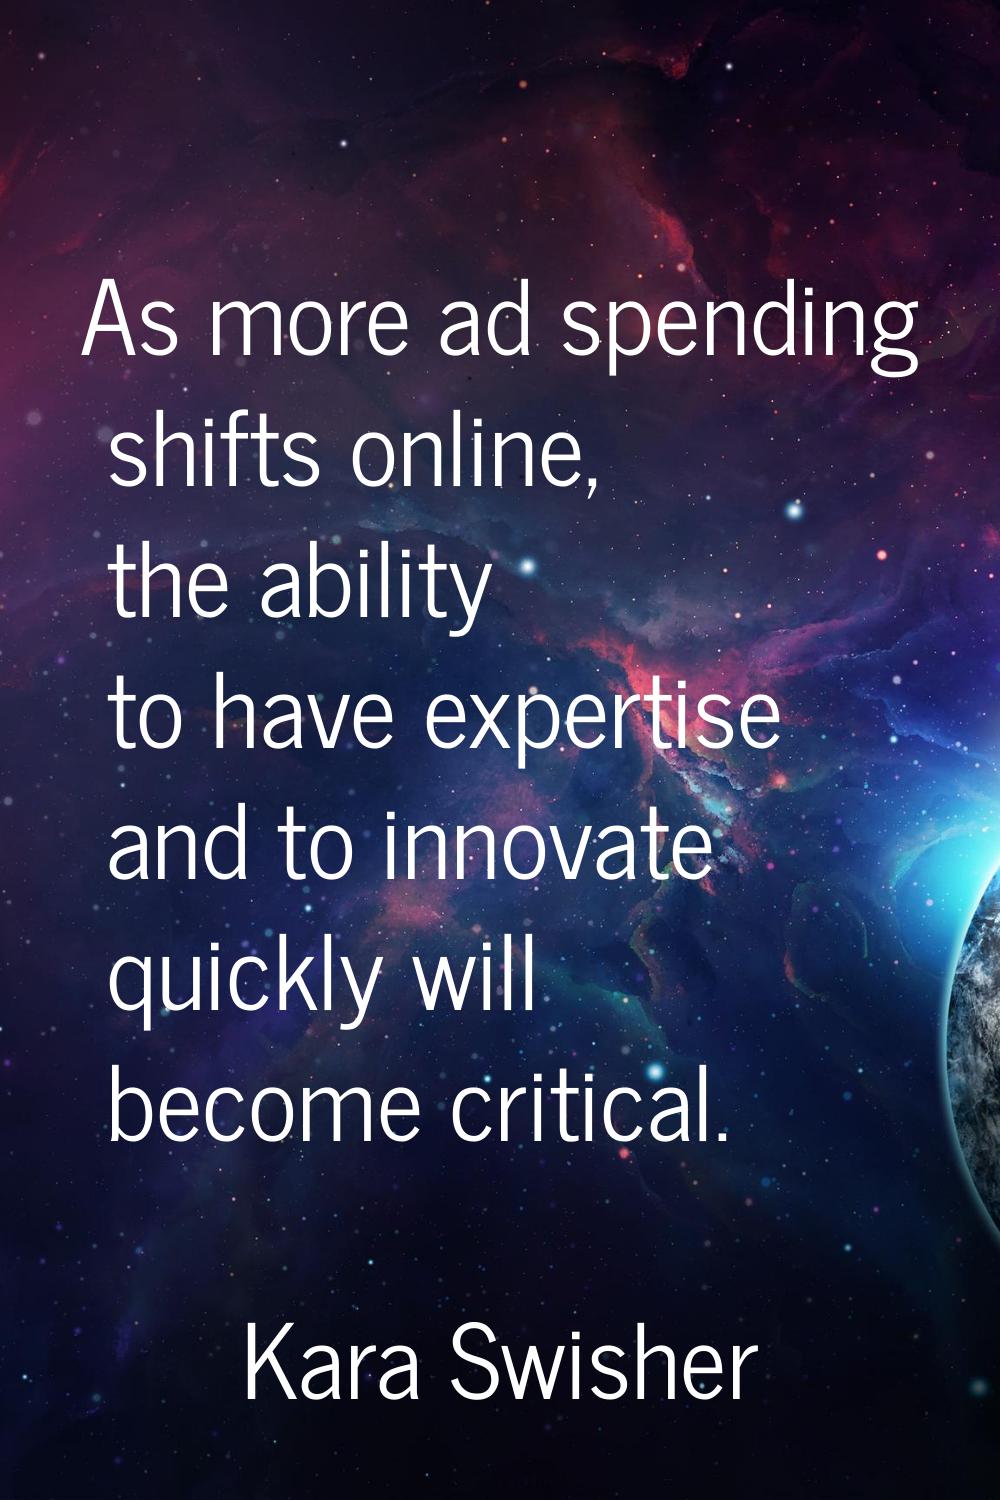 As more ad spending shifts online, the ability to have expertise and to innovate quickly will becom